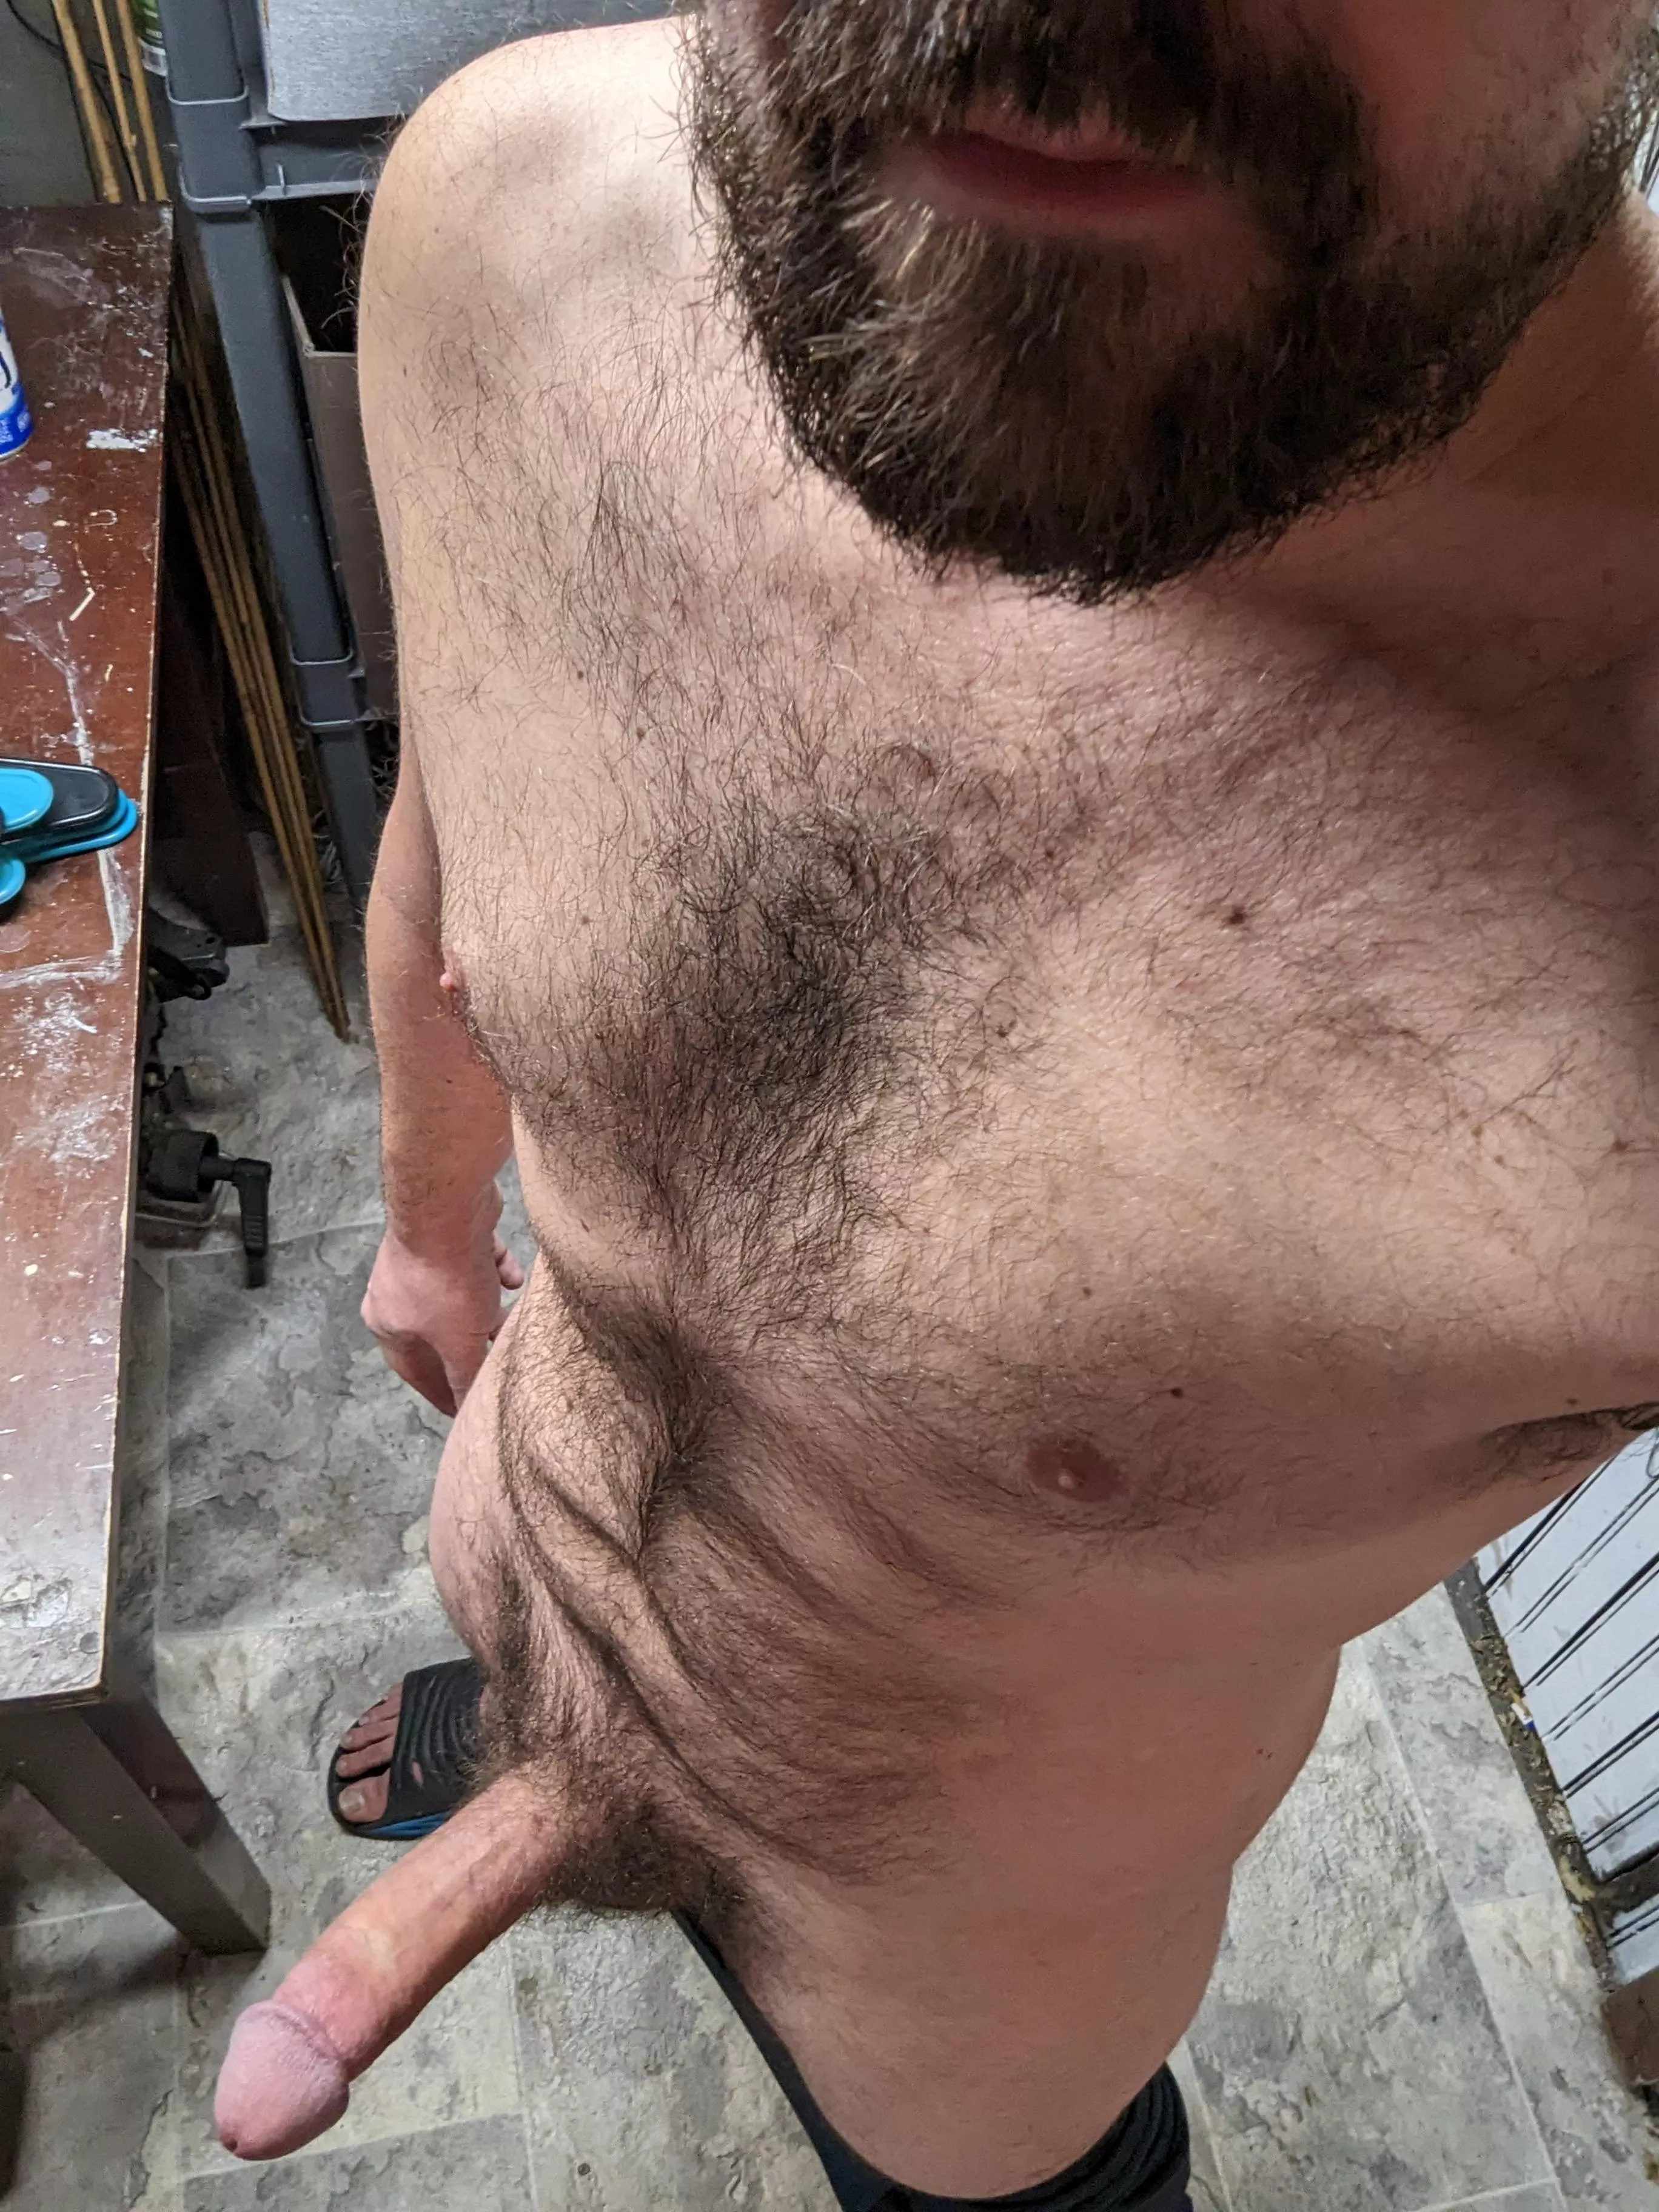 2736px x 3648px - Tired of boring sex? Come over. (37) (m) nudes by yourbeardedneighbor